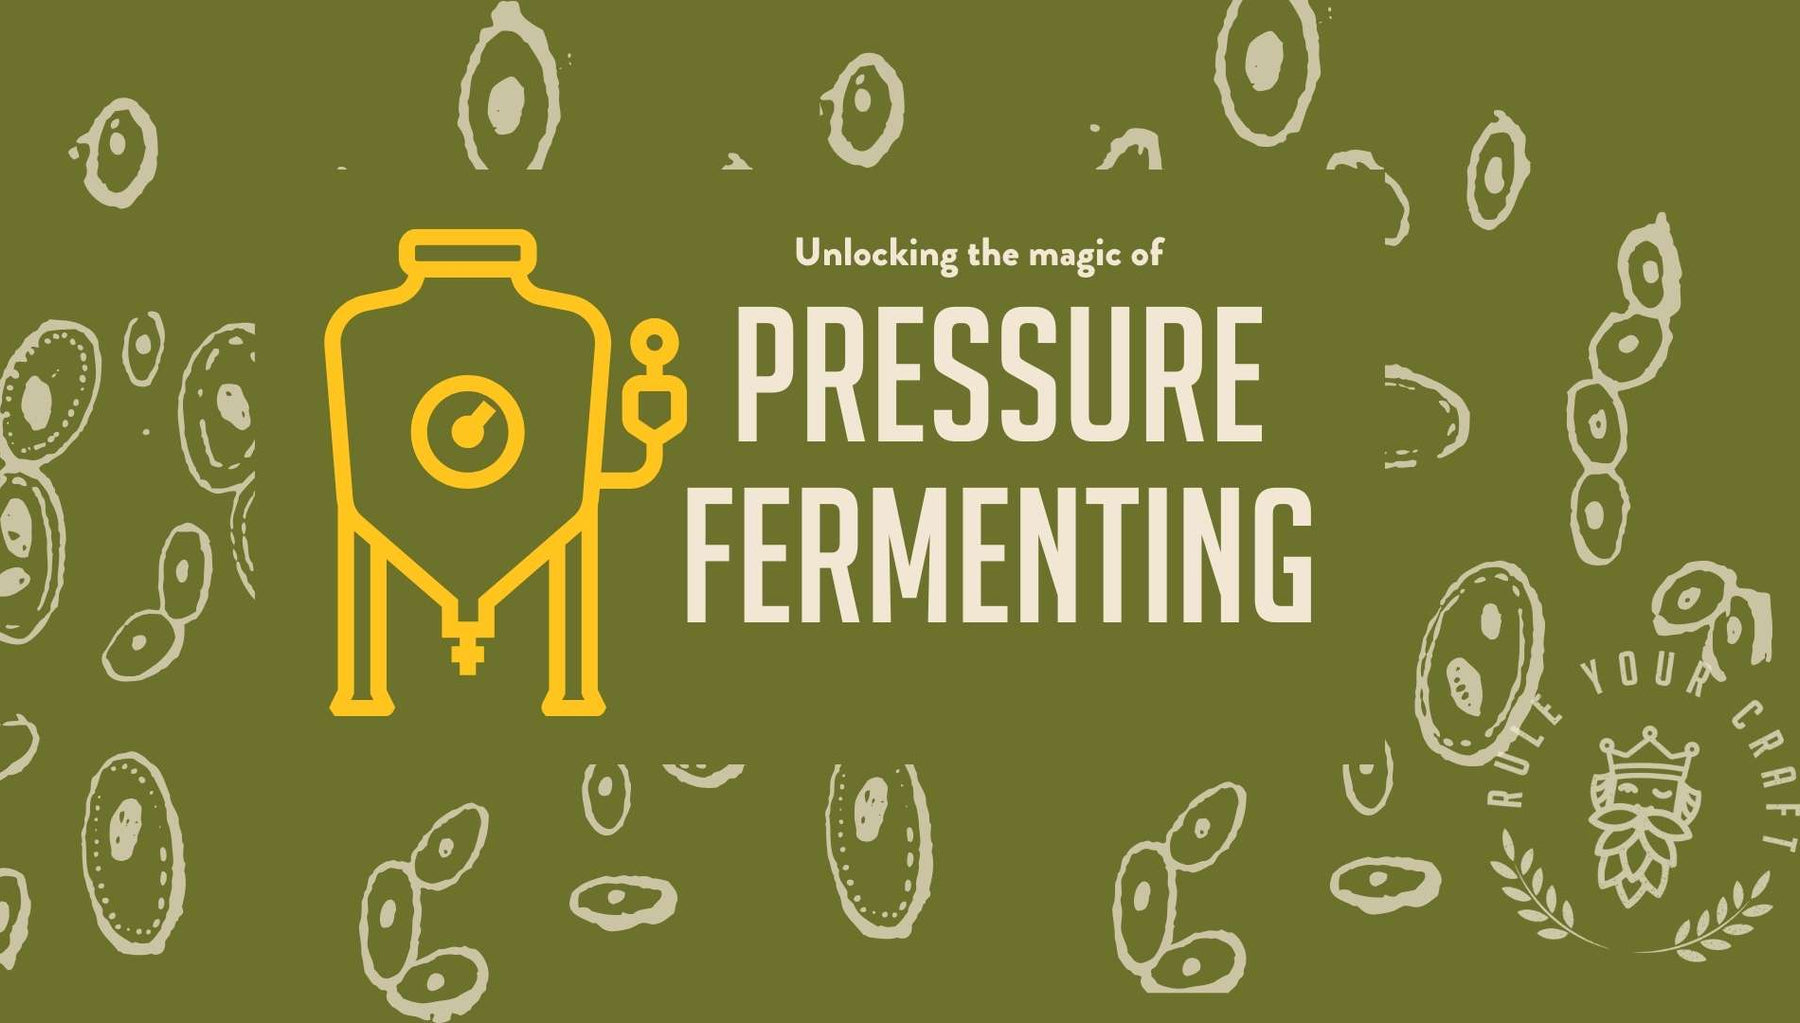 What is pressure fermenting blog post